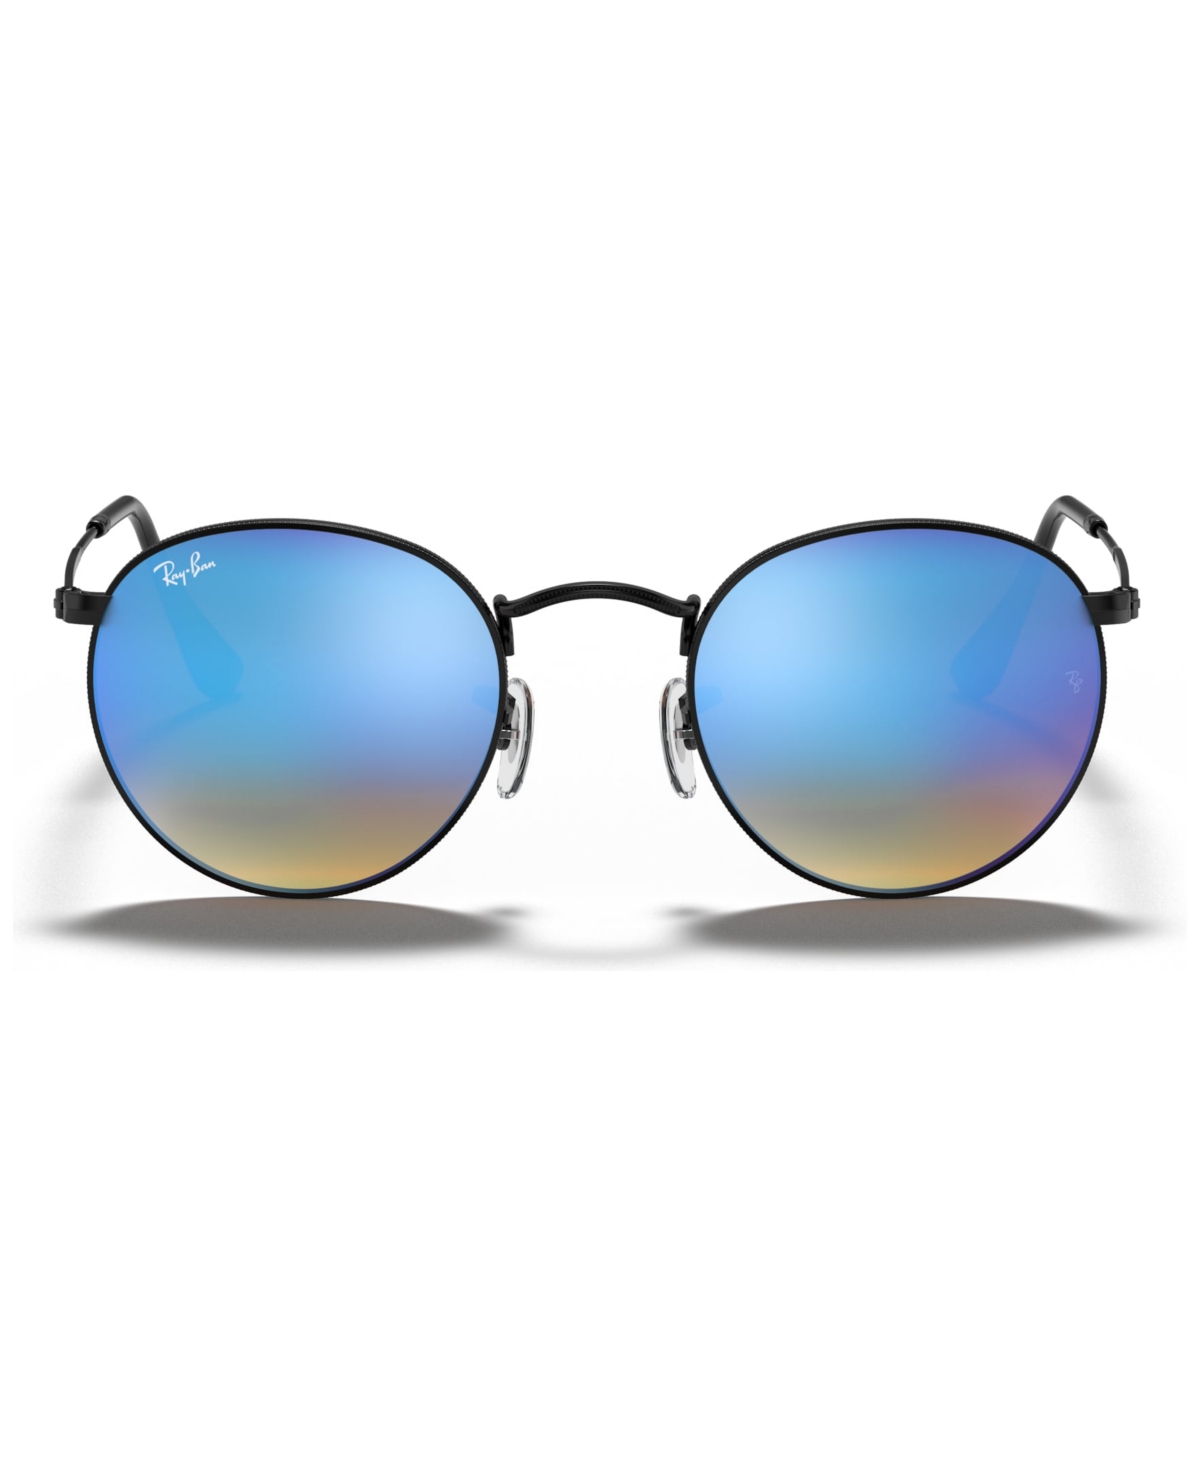 Ray Ban Sunglasses, Rb3447 Round Flash Lenses In Black,blue Gradient